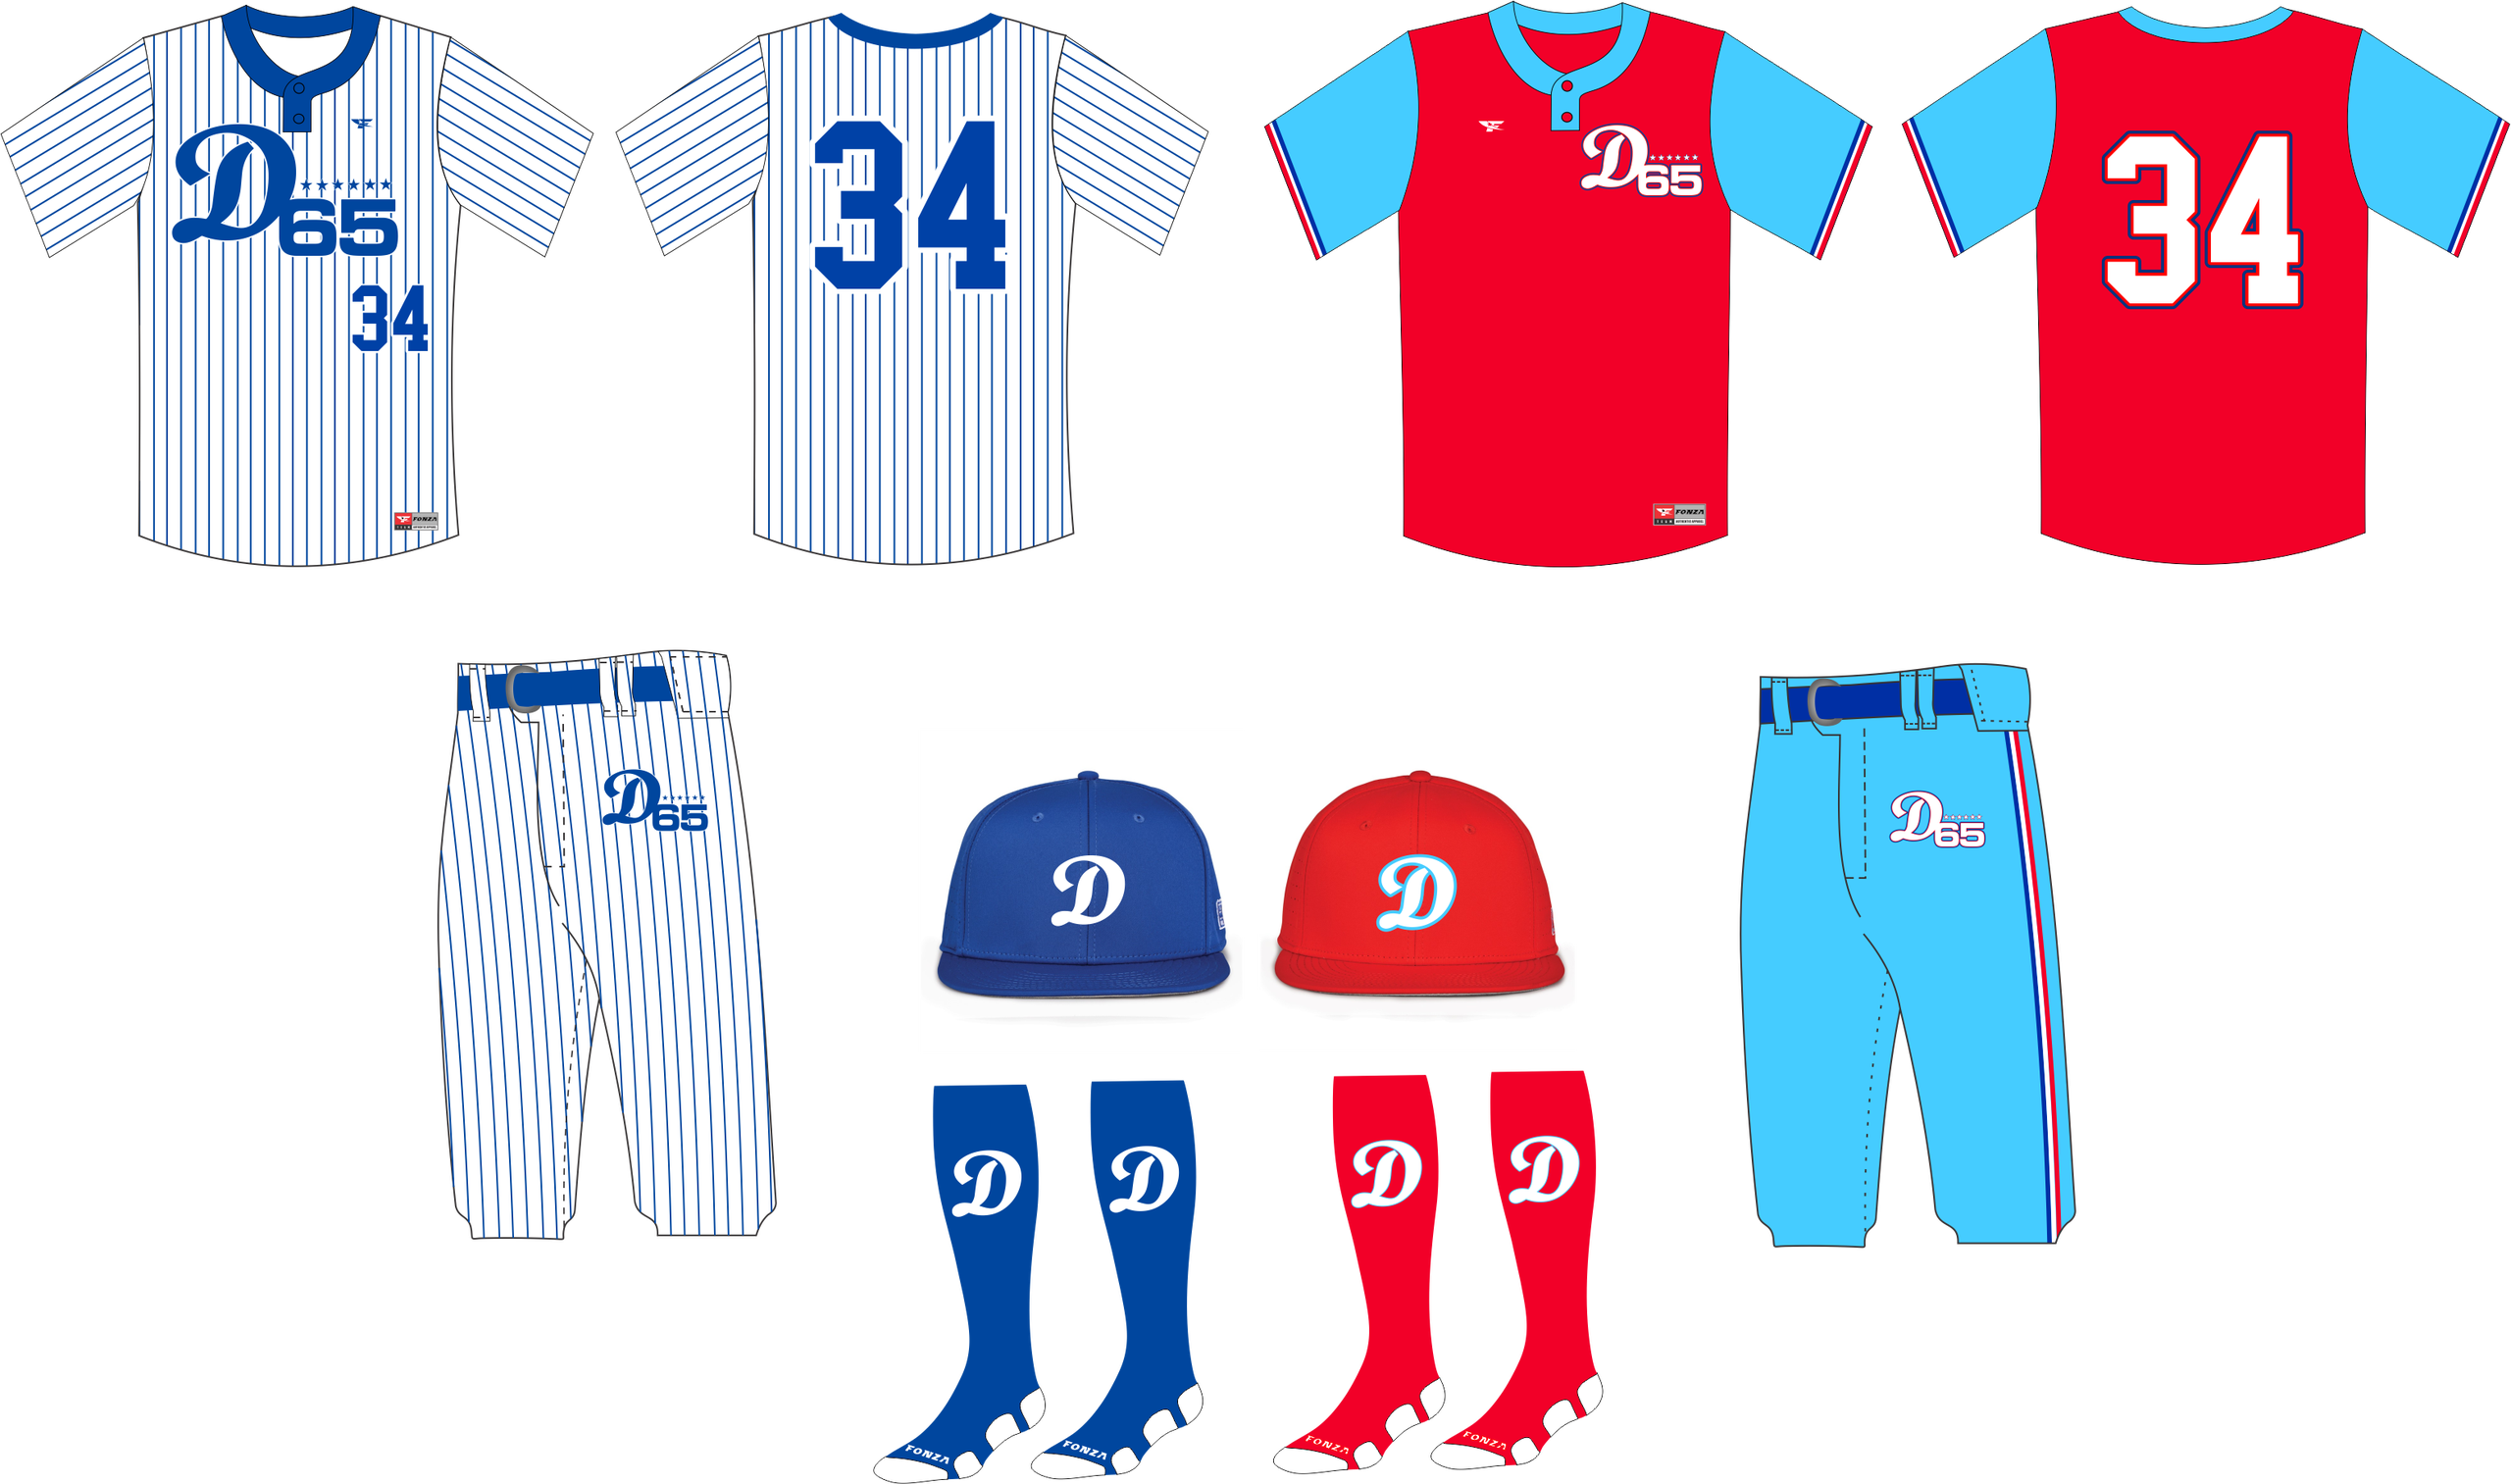 expos home jersey